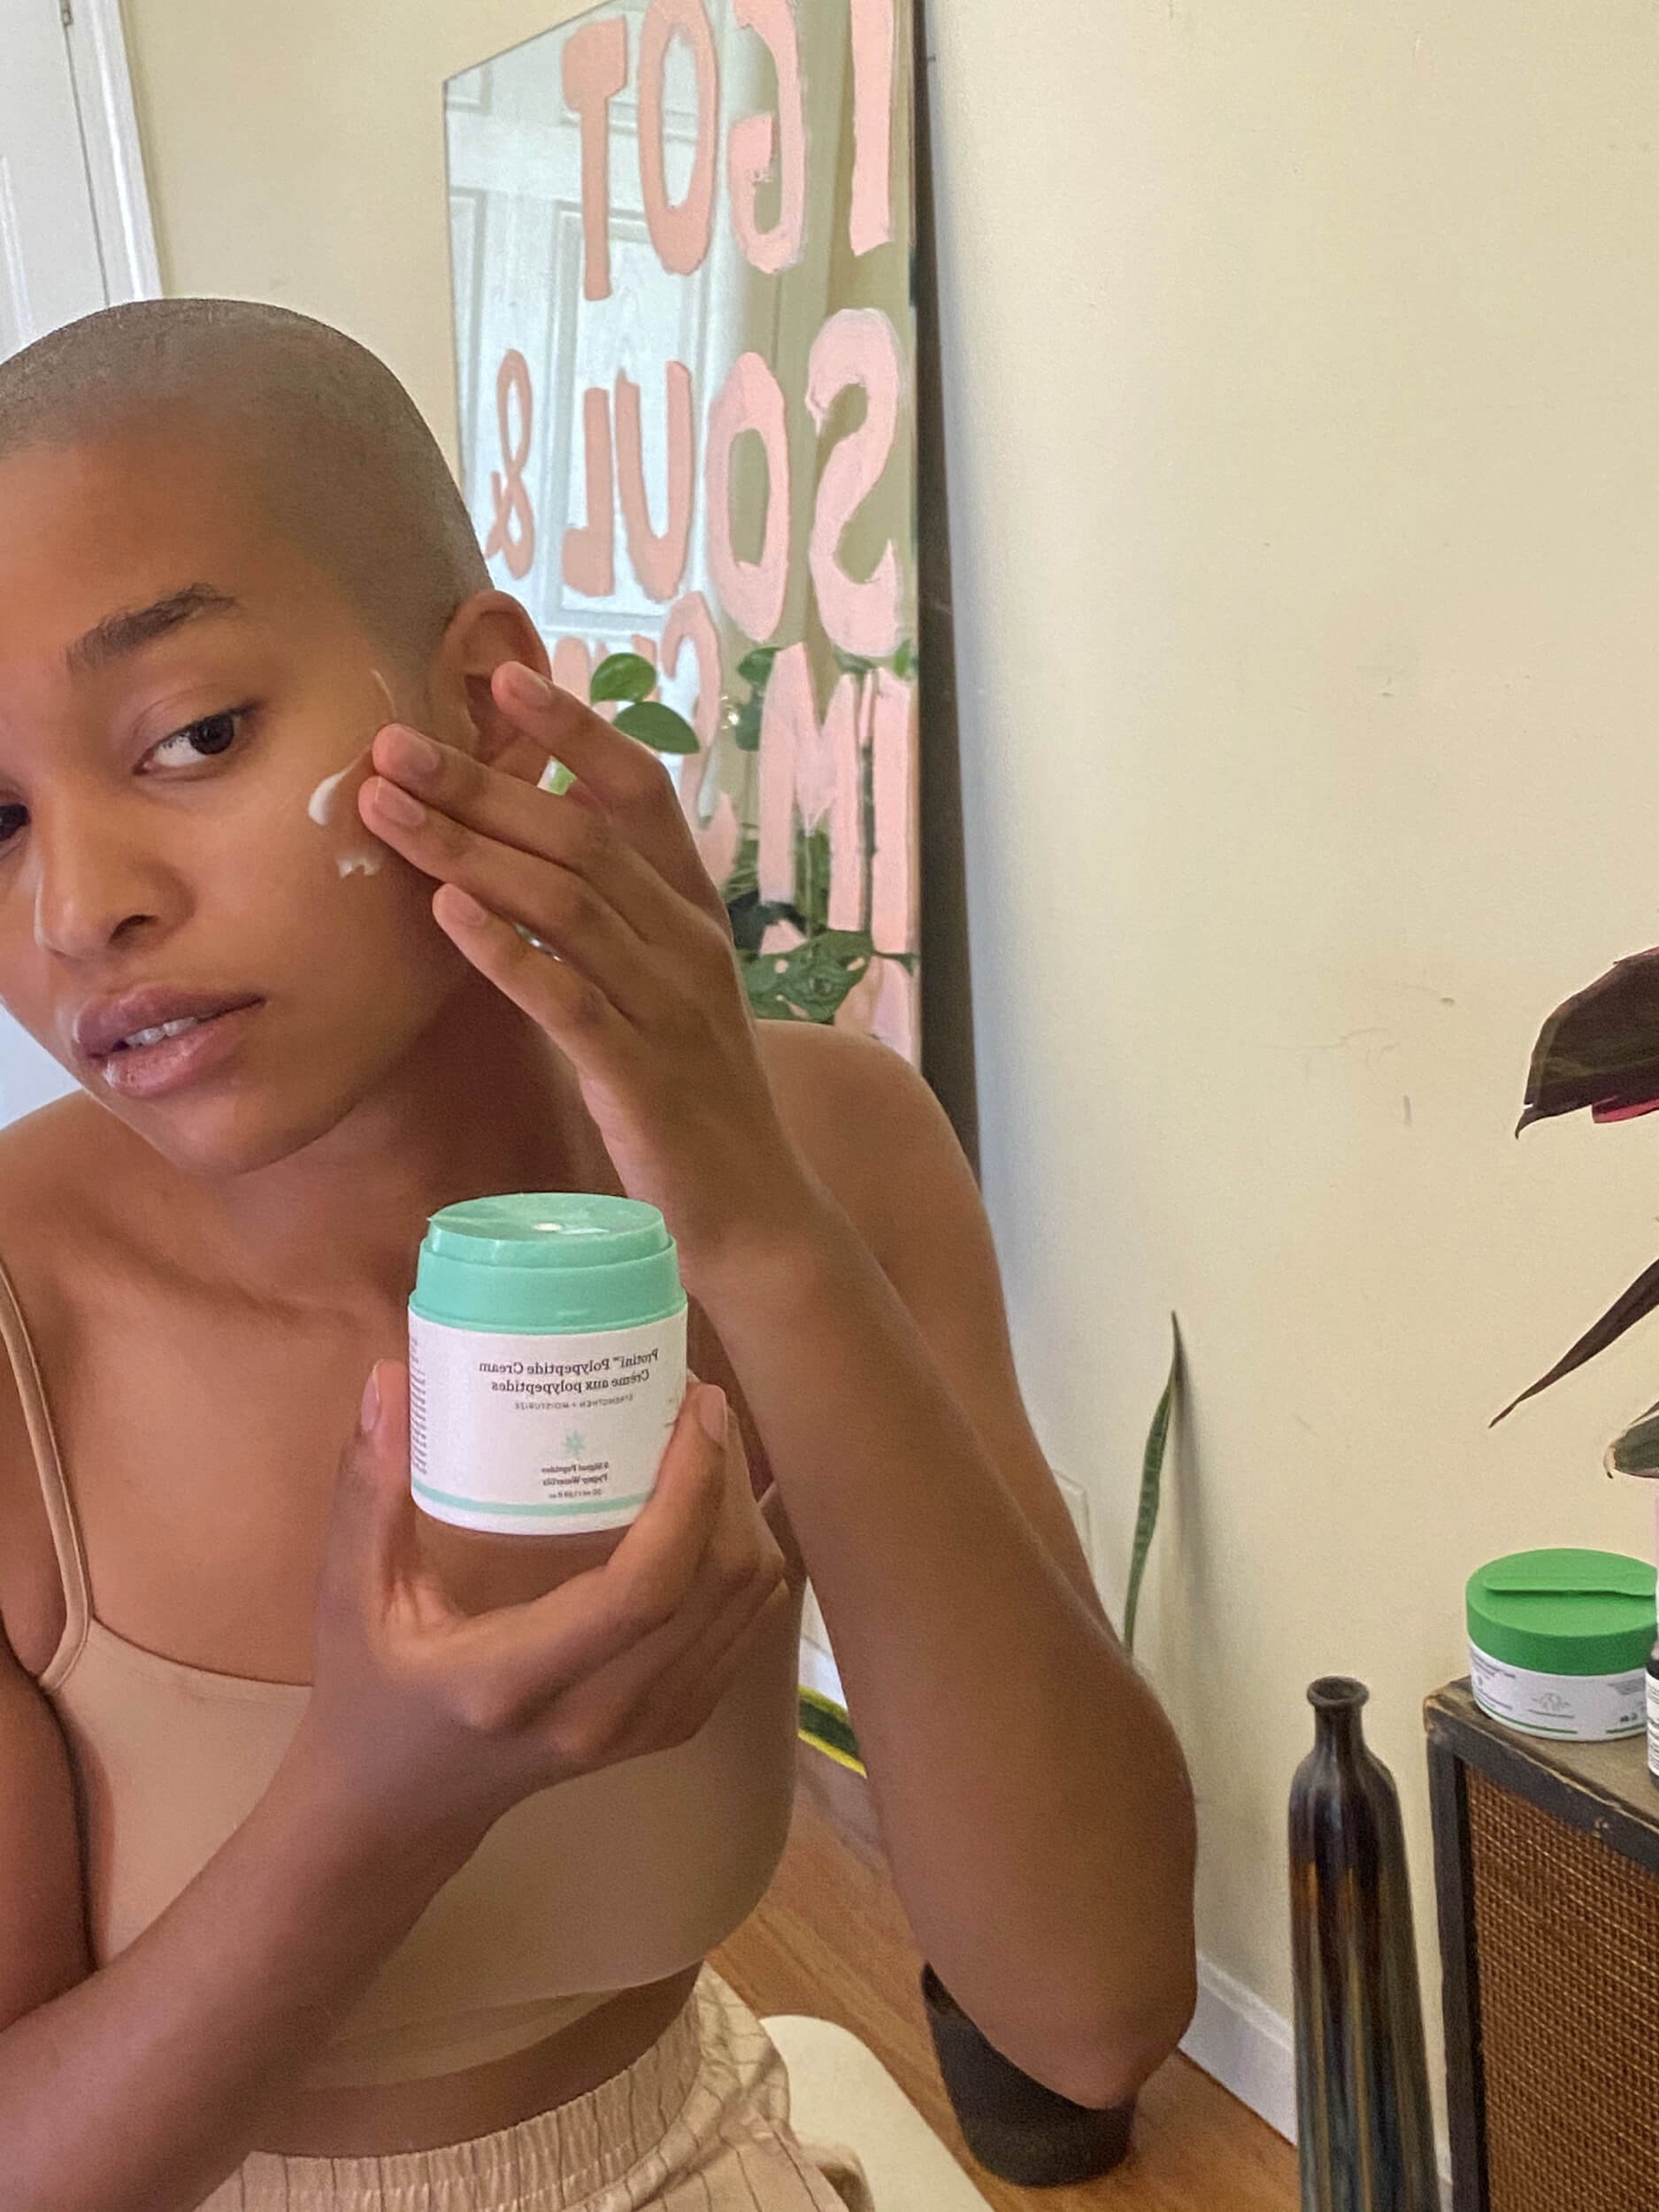 Equals in Diversity Black Skin Beauty Routine